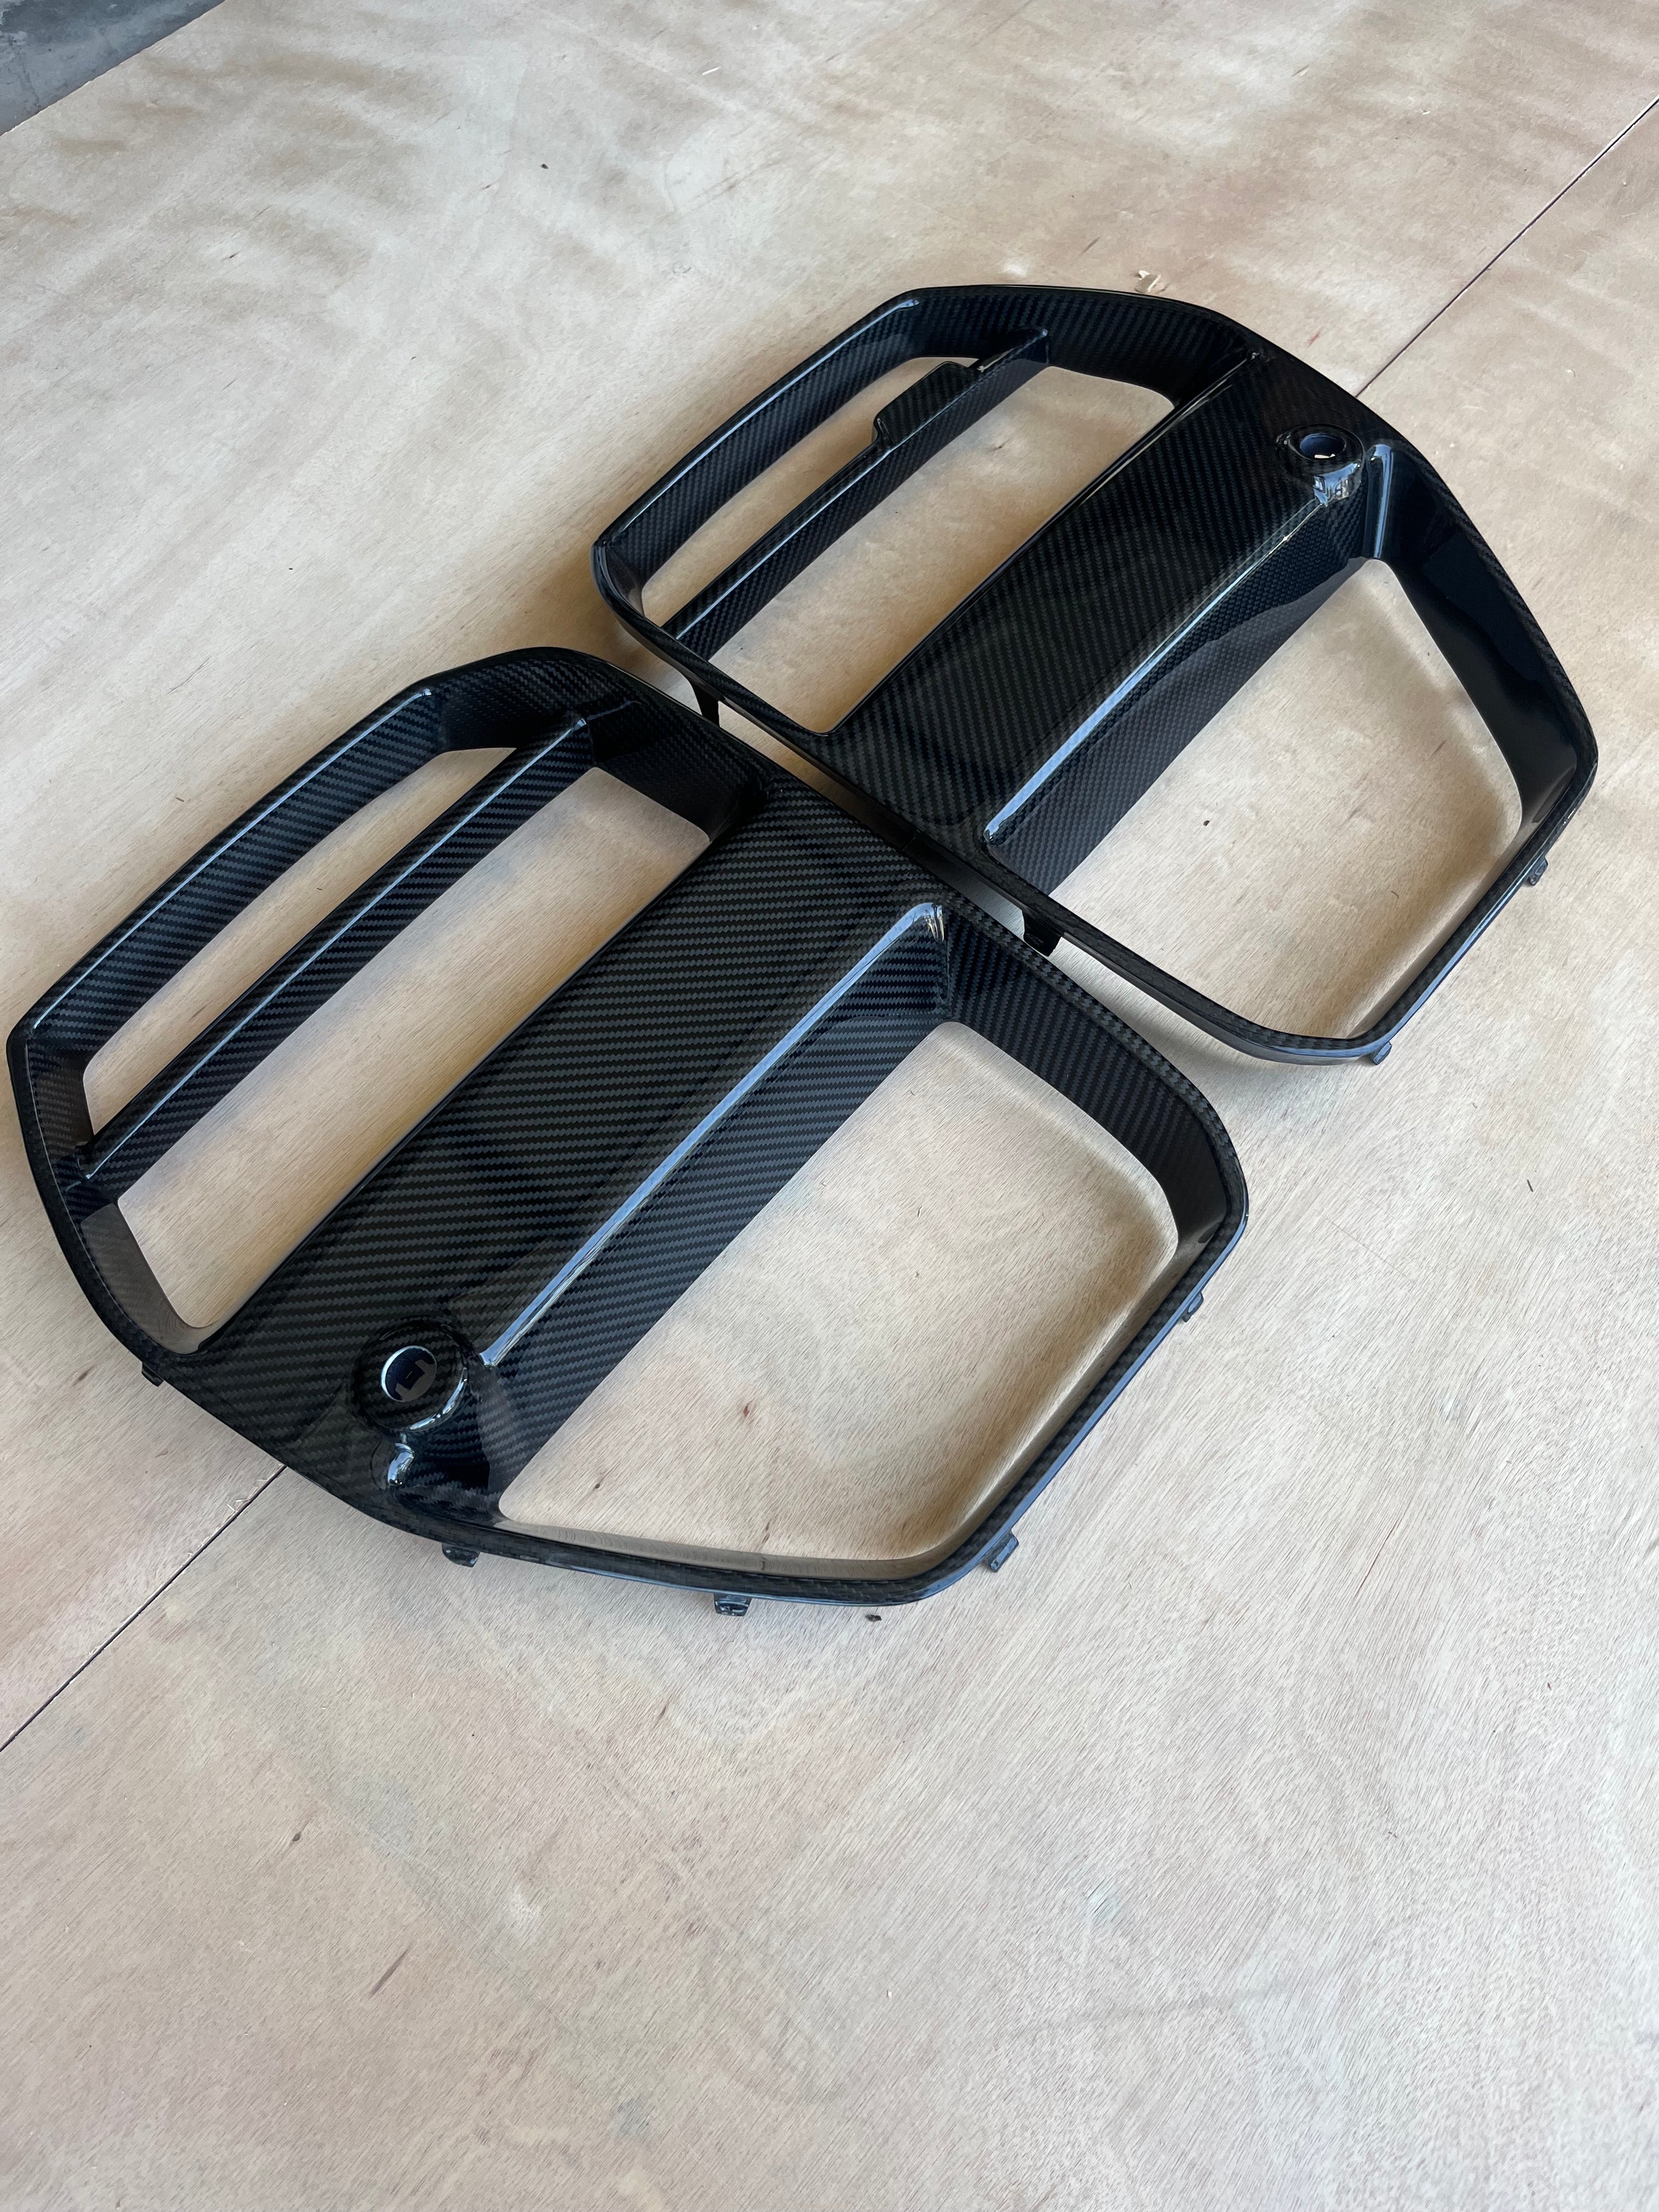 V style carbon fiber front grill replacement - G80 M3 | G82/G83 M4